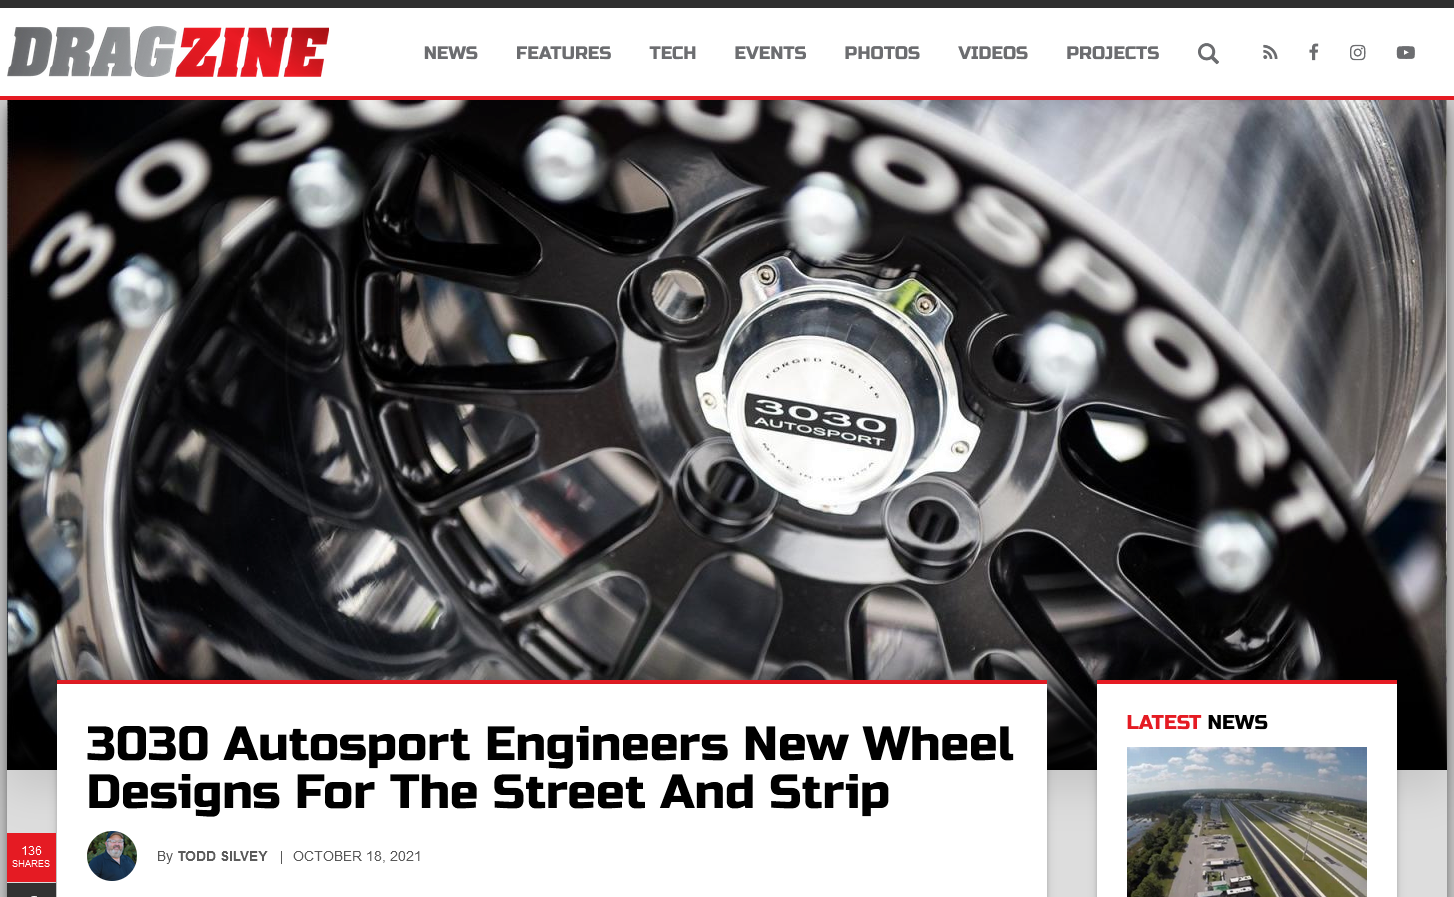 3030 Autosport Engineers New Wheel Designs For The Street And Strip